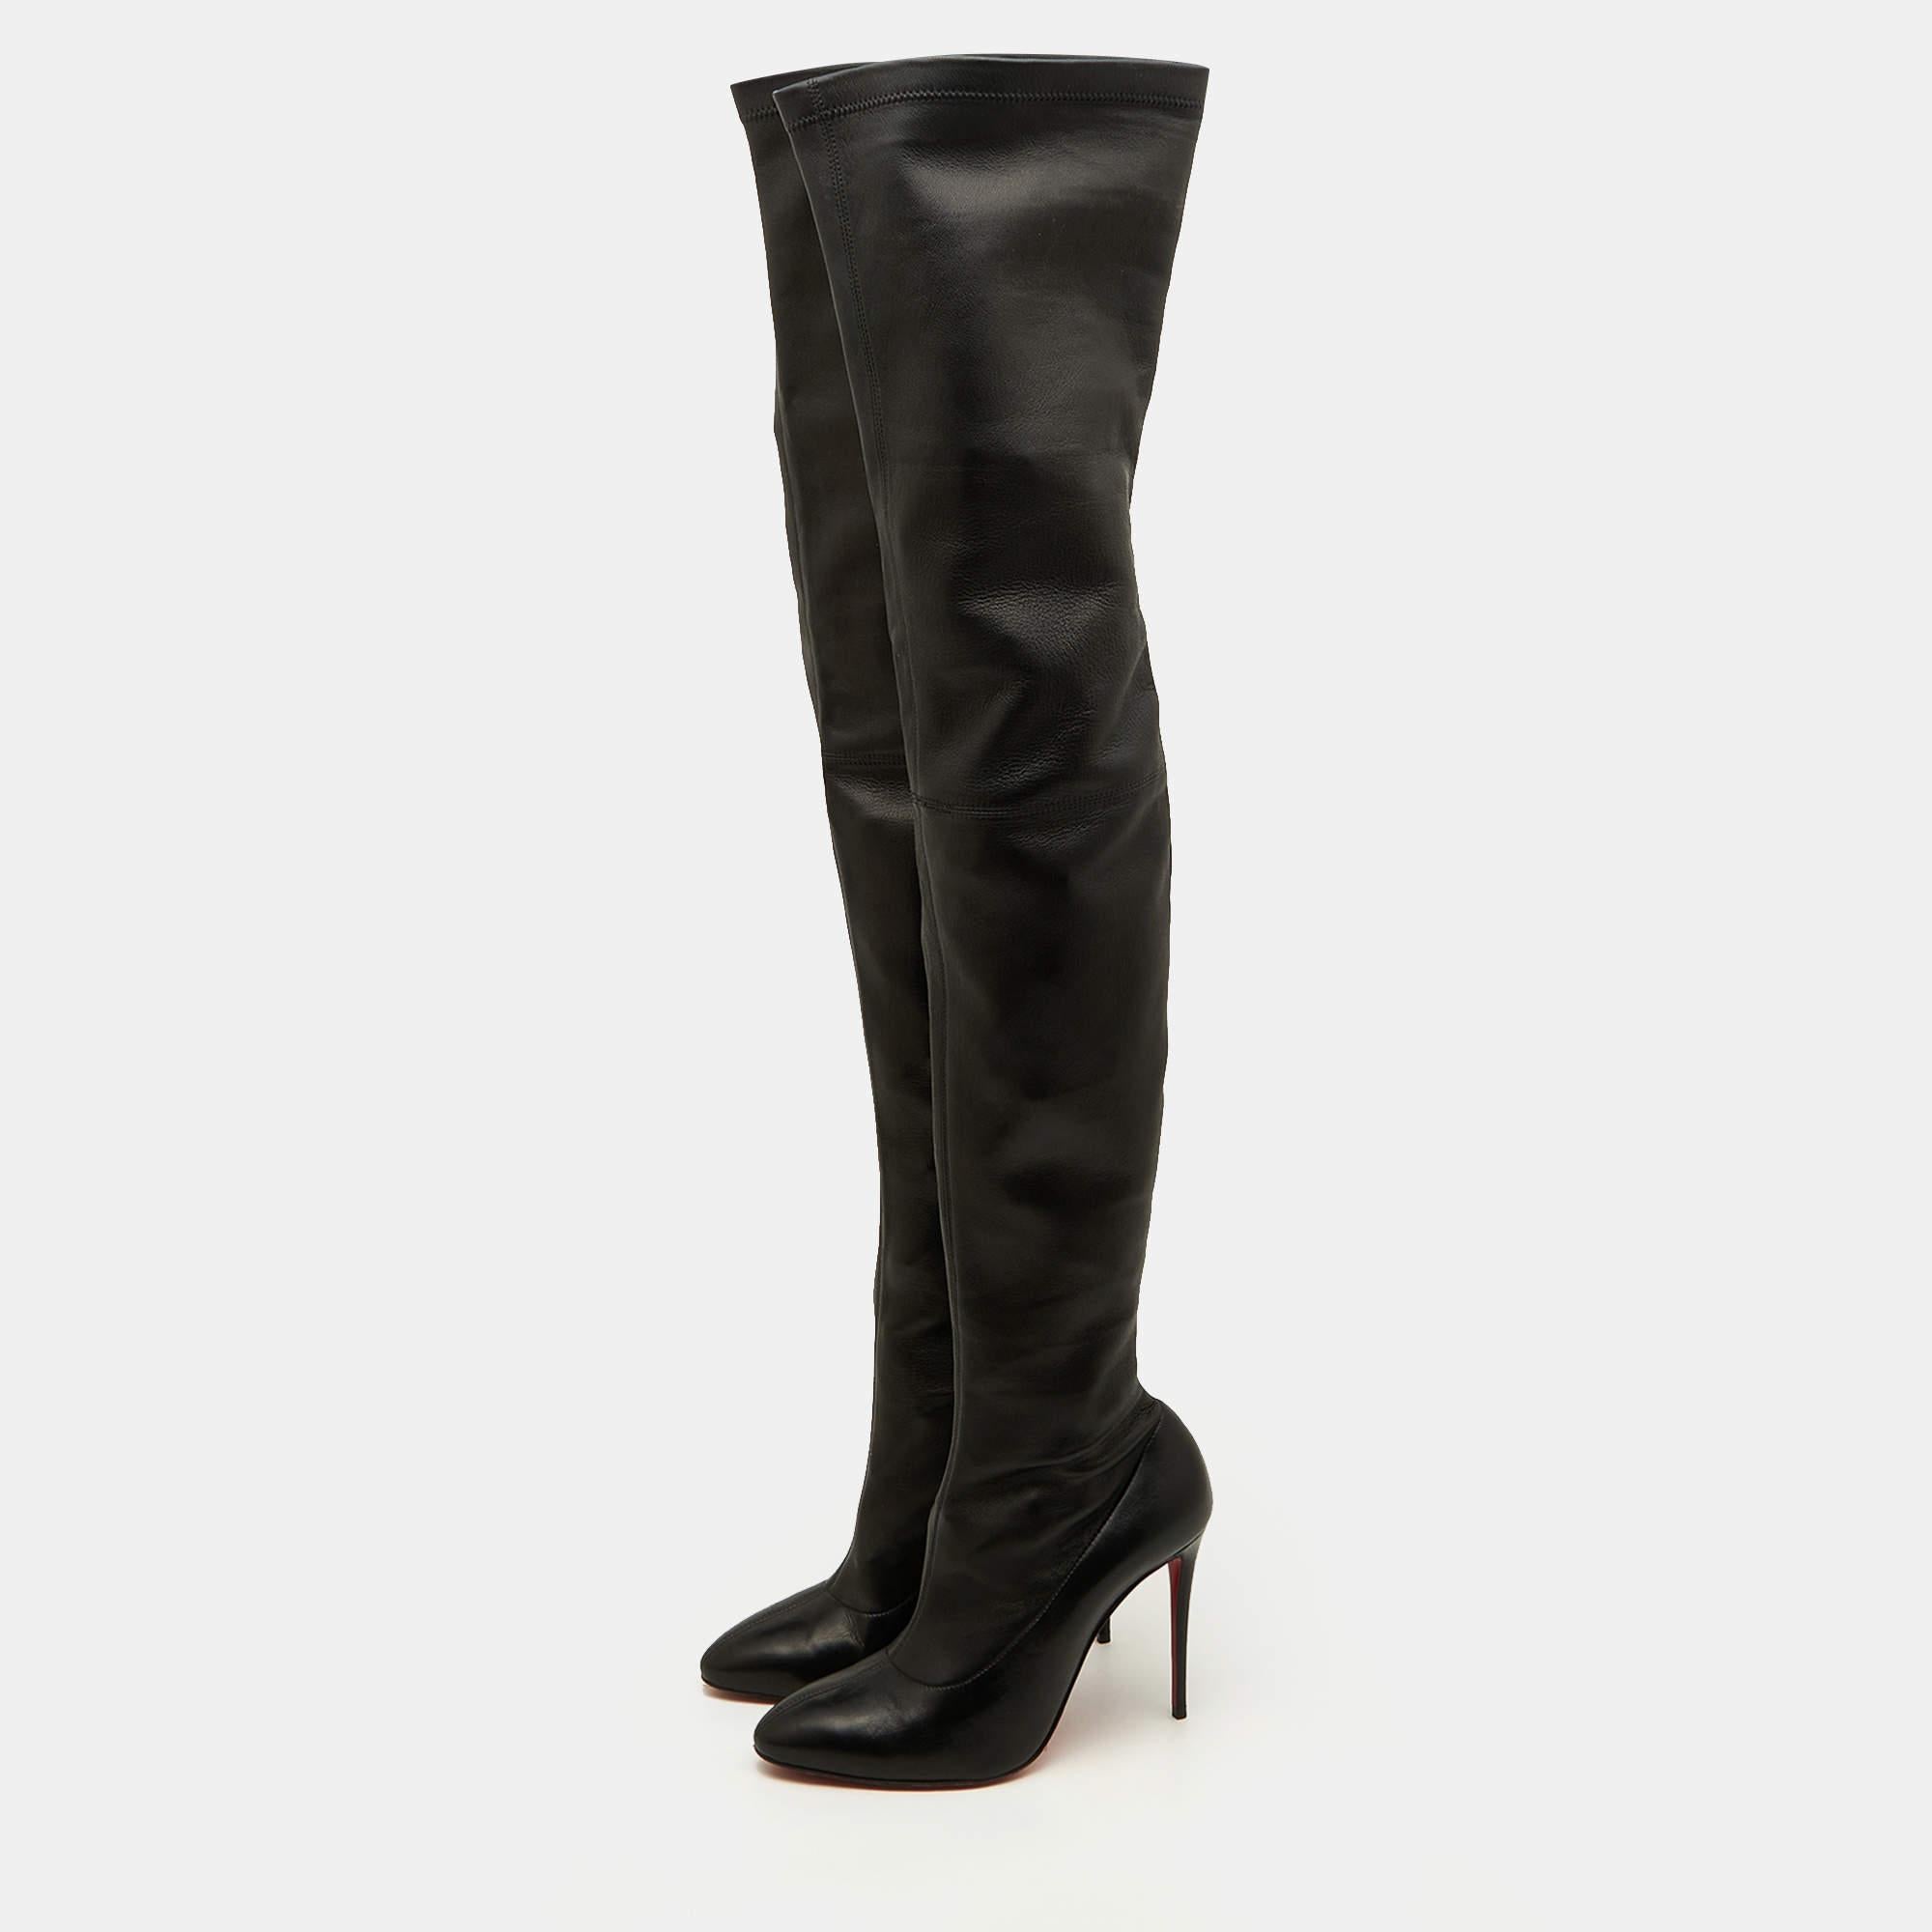 Christian Louboutin Black Leather Thigh High Boots Size 38 4